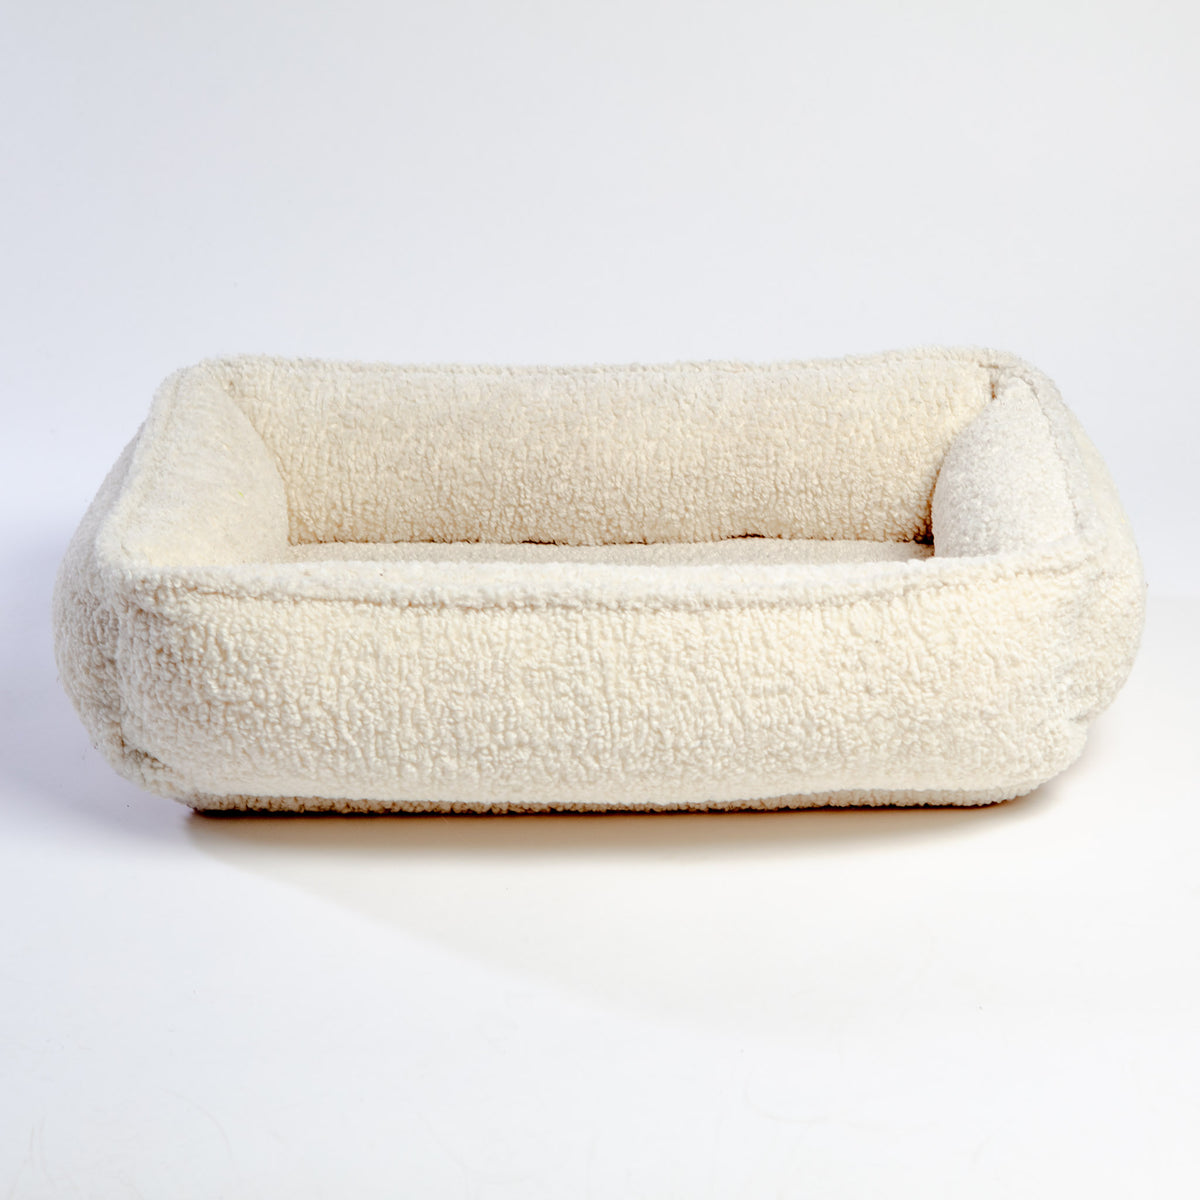 Bowsers Carry-All Dog Carrier - Ivory Sheepskin Faux Fur